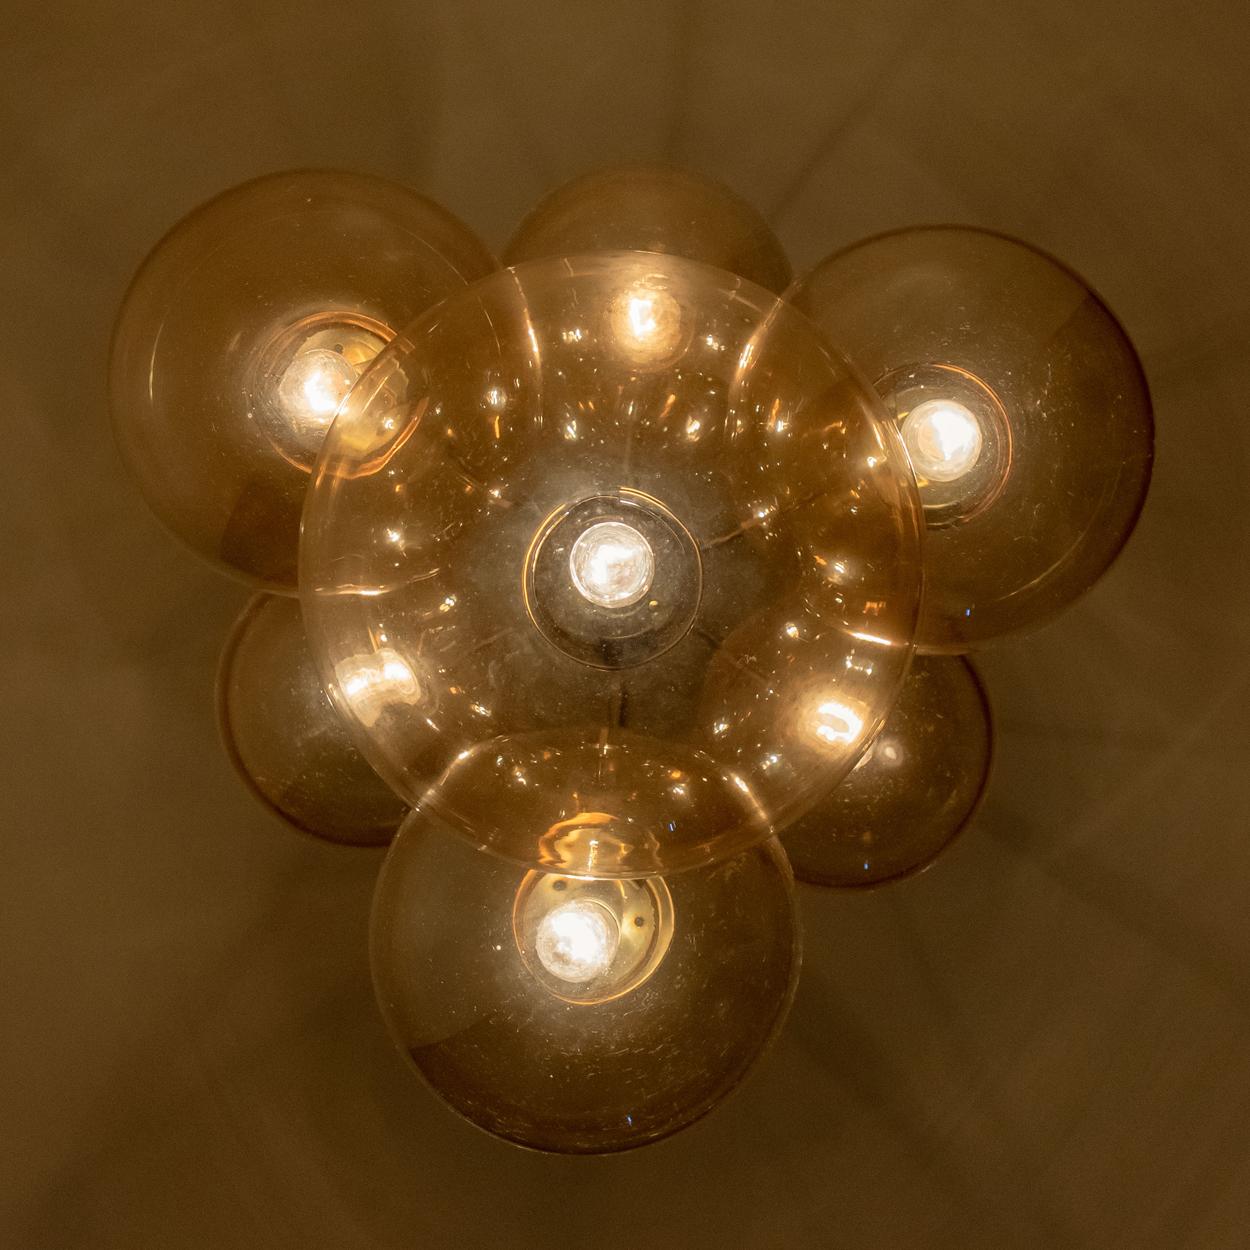 Absolutely amazing huge ceiling mount pendant light fixture with seven different sizes of globes or spheres by Limburg Glashütte. With hand blown glass pendants. Very suitable for building beautiful compositions. A rare opportunity which you don’t